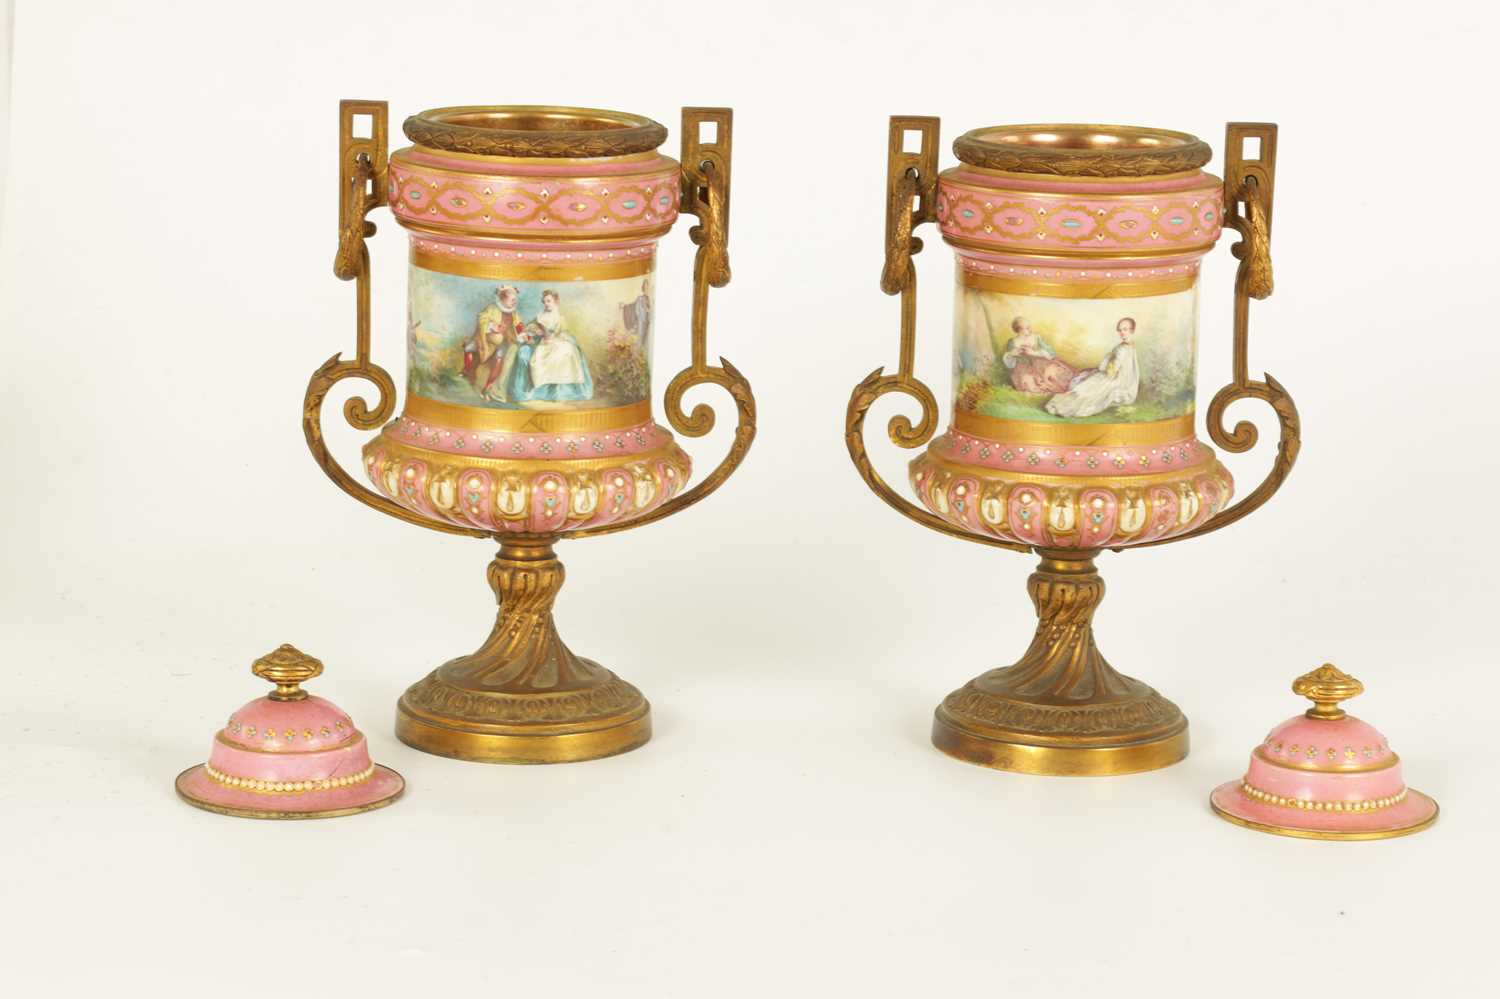 A PAIR OF 19TH CENTURY SEVRES PORCELAIN AND ORMOLU MOUNTED LIDED VASES - Image 4 of 9